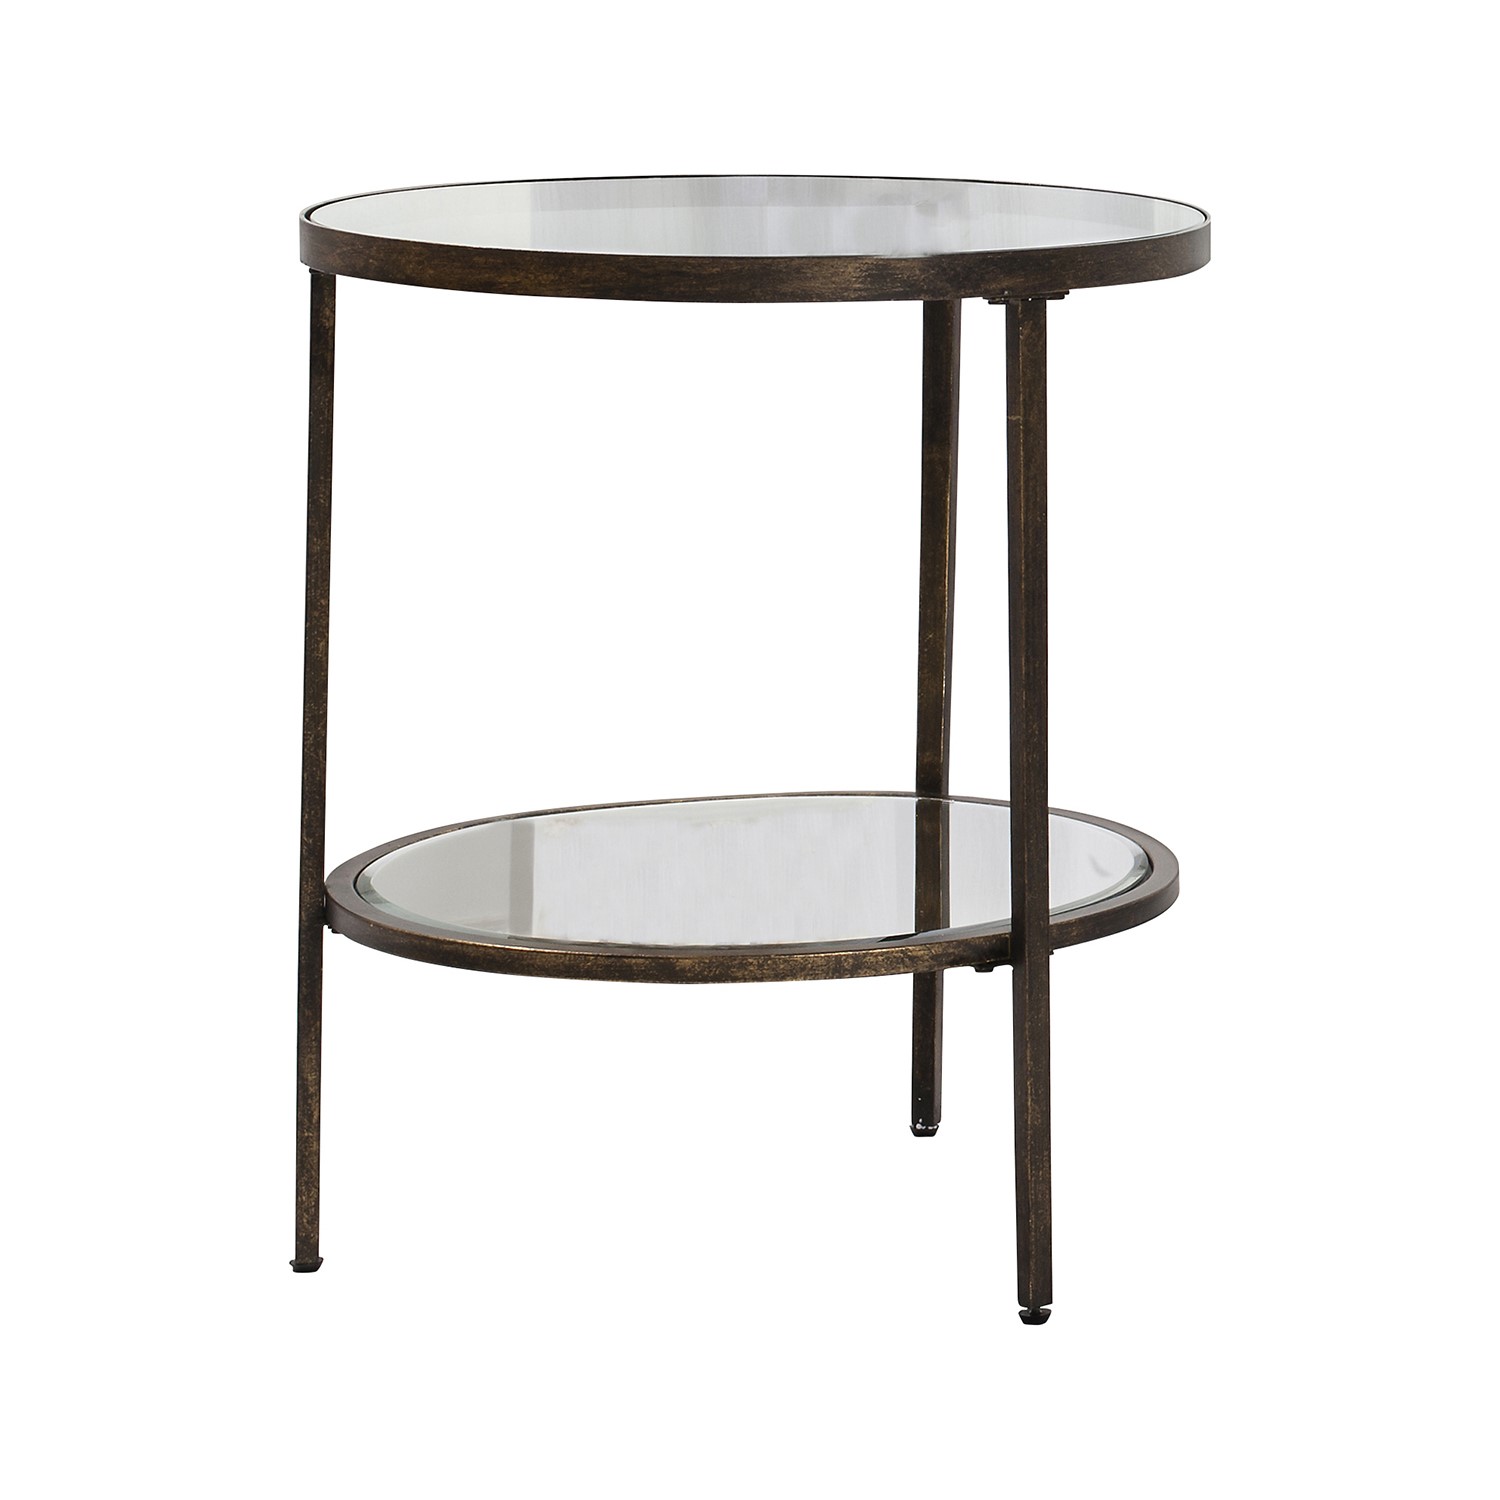 Read more about Hudson glass side table in bronze caspian house